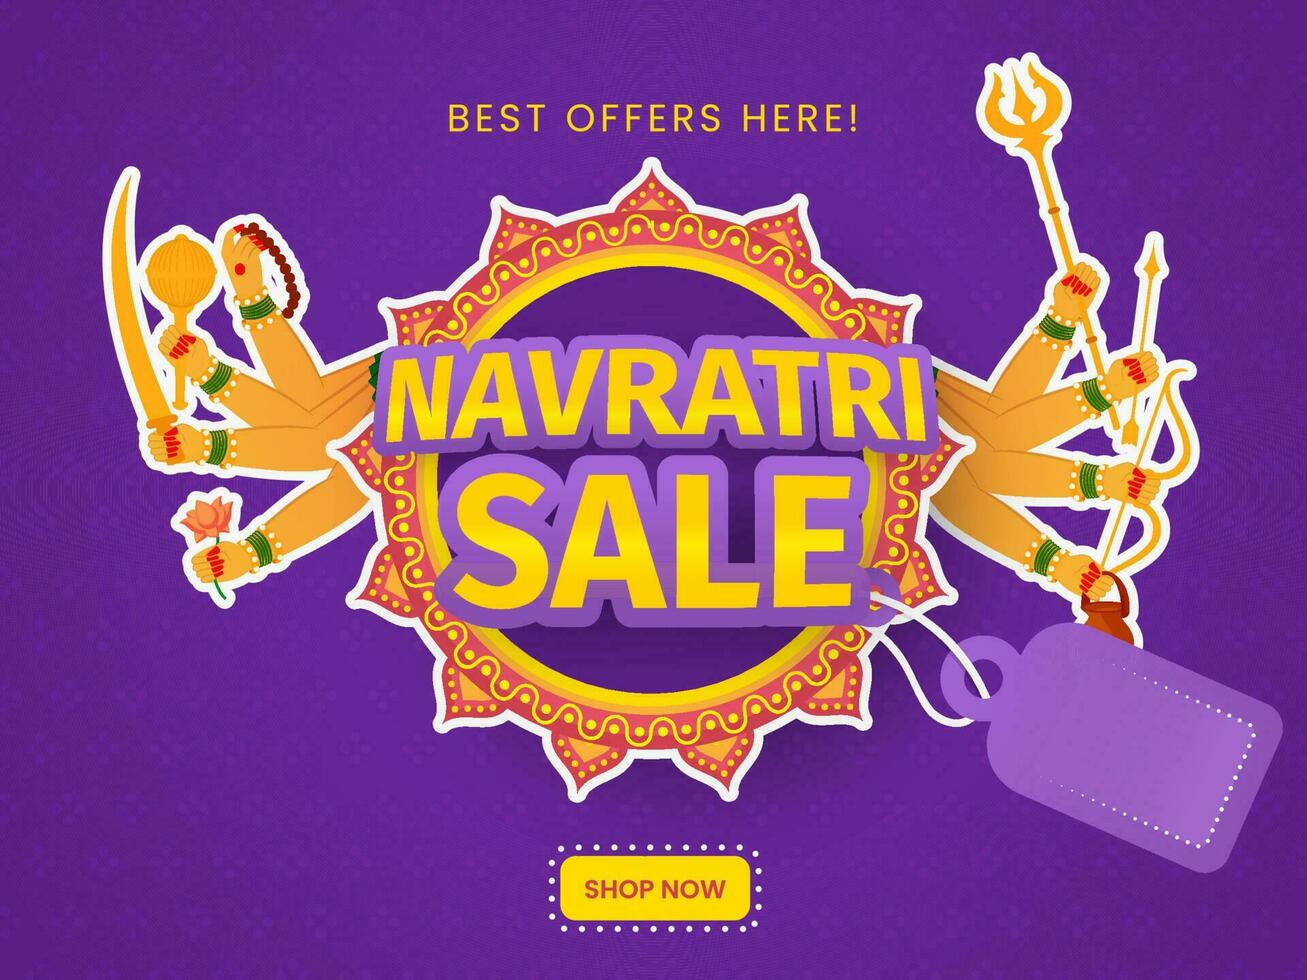 Navratri Festival Sale Poster Design With Sticker Style Mandala Frame And Goddess Durga Eight Hands On Purple Background. vector